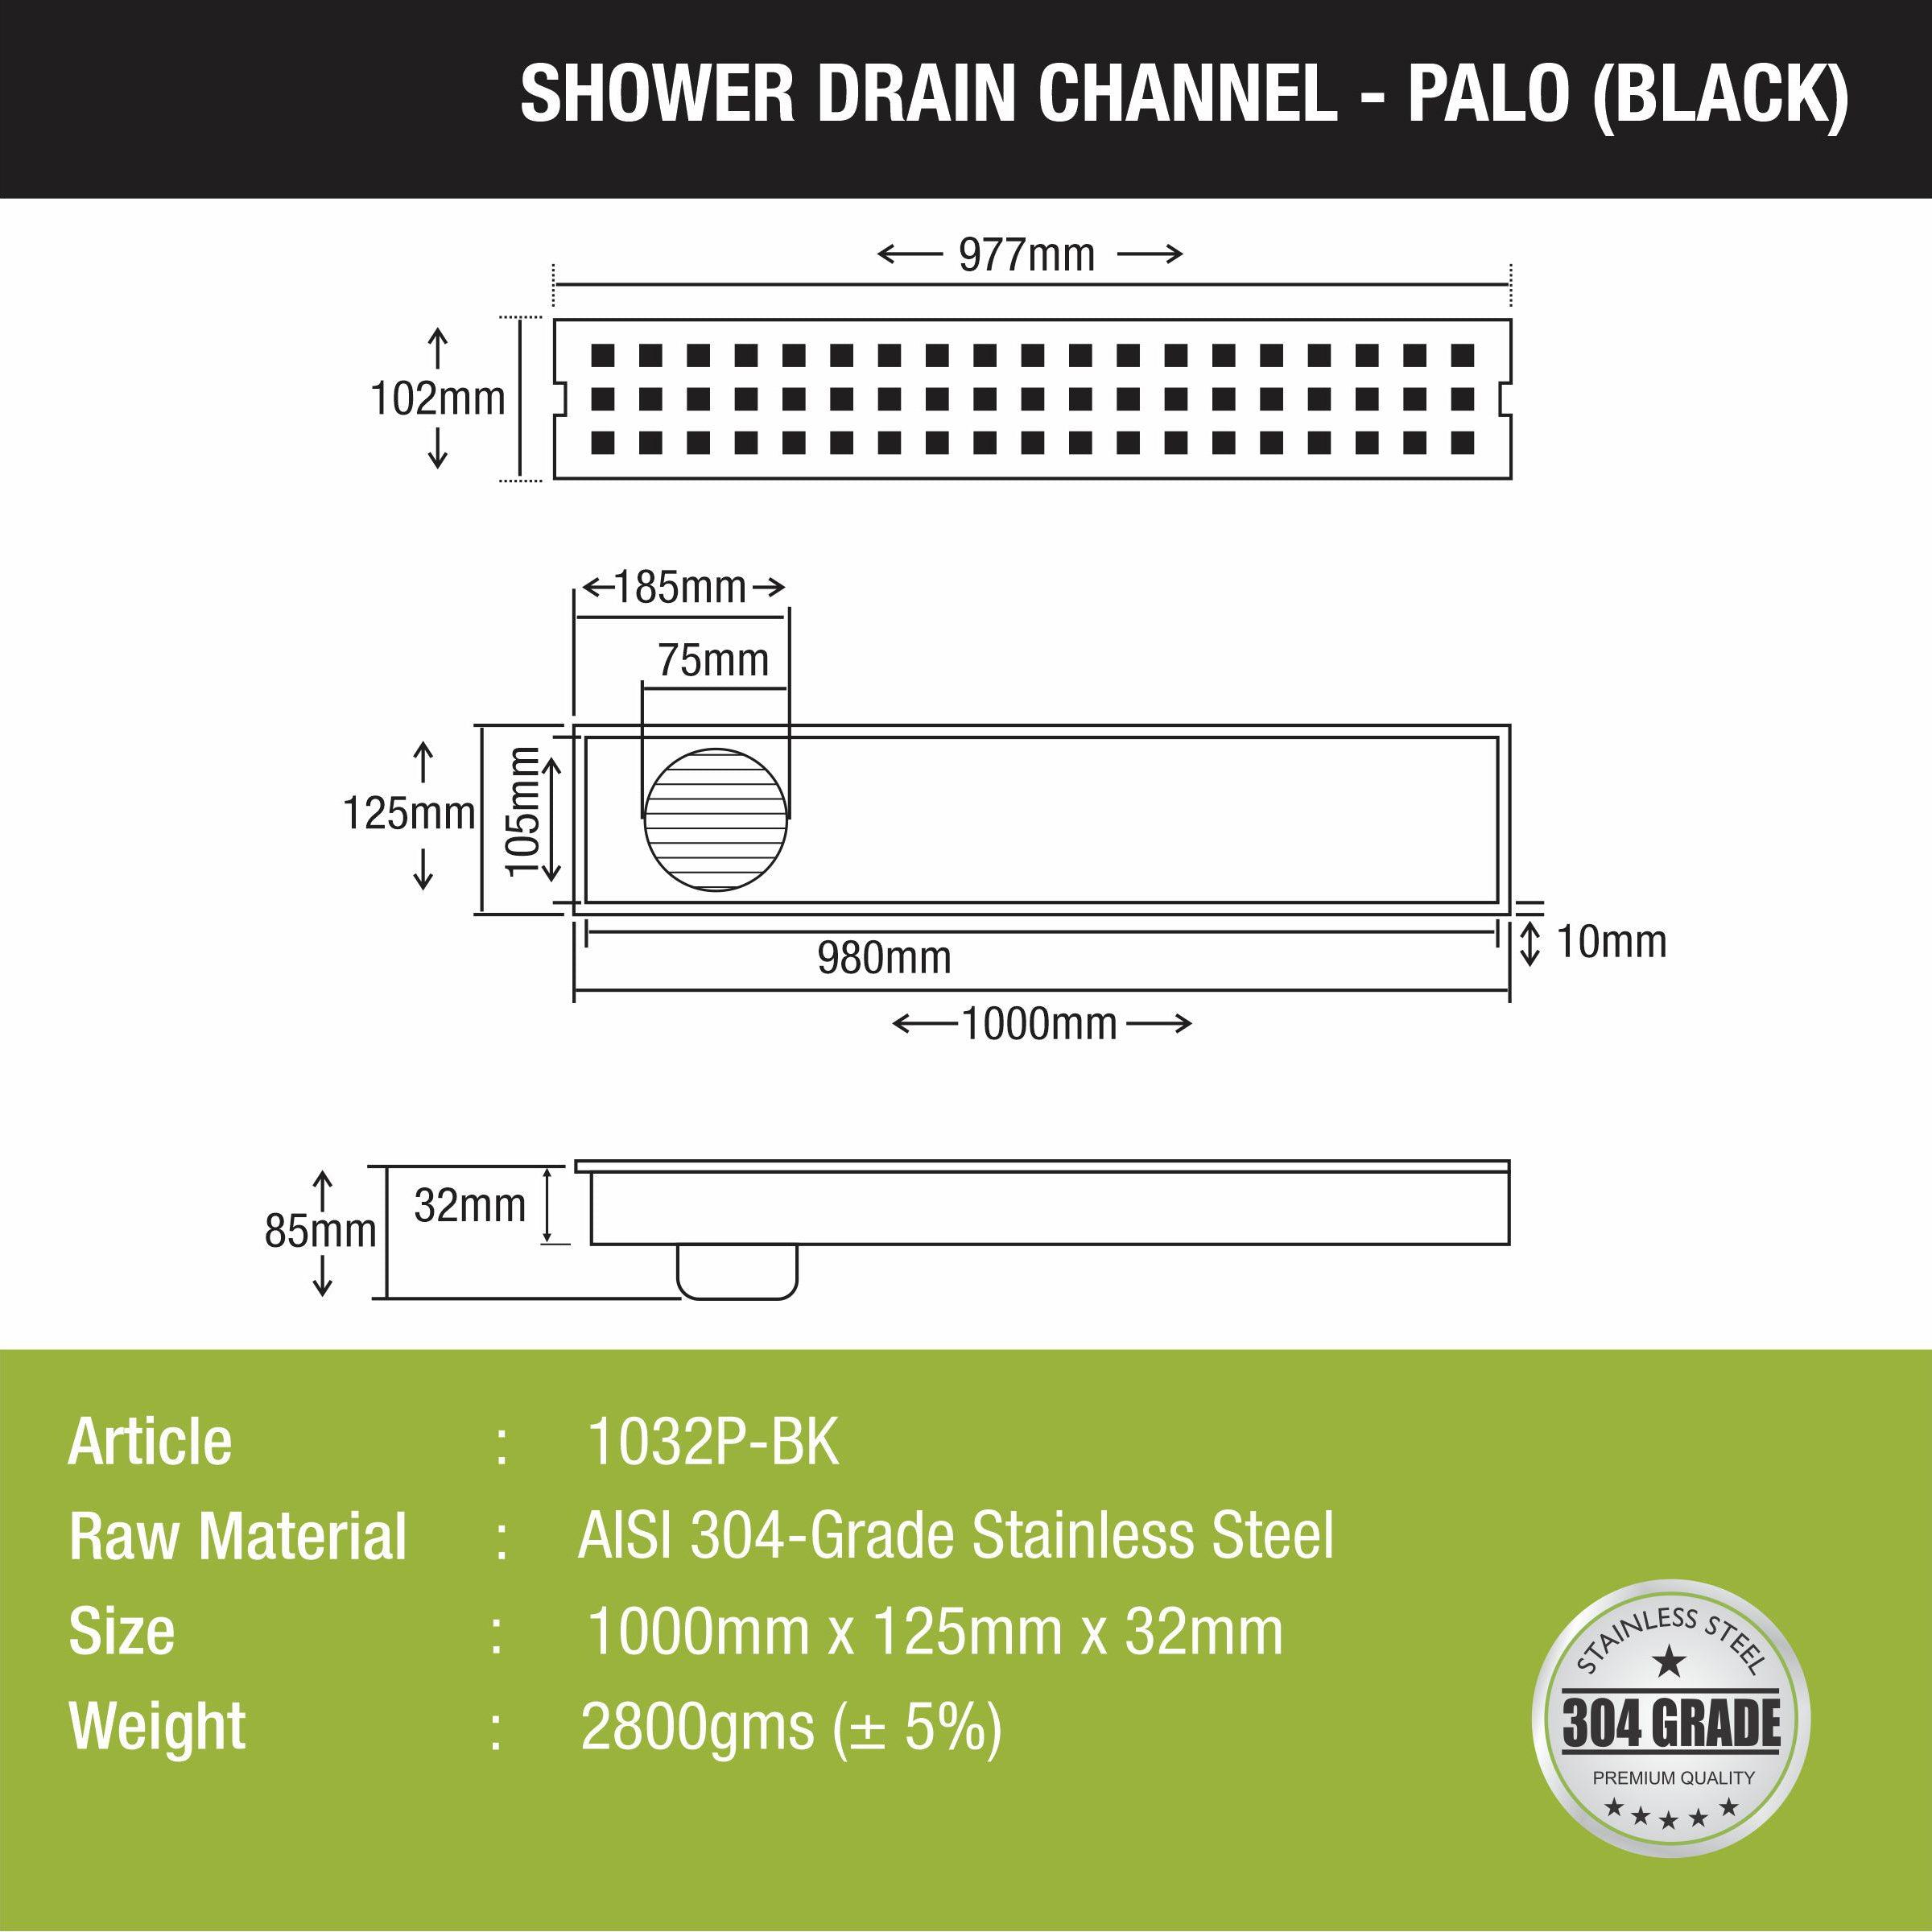 Palo Shower Drain Channel - Black (40 x 5 Inches) size and measurement